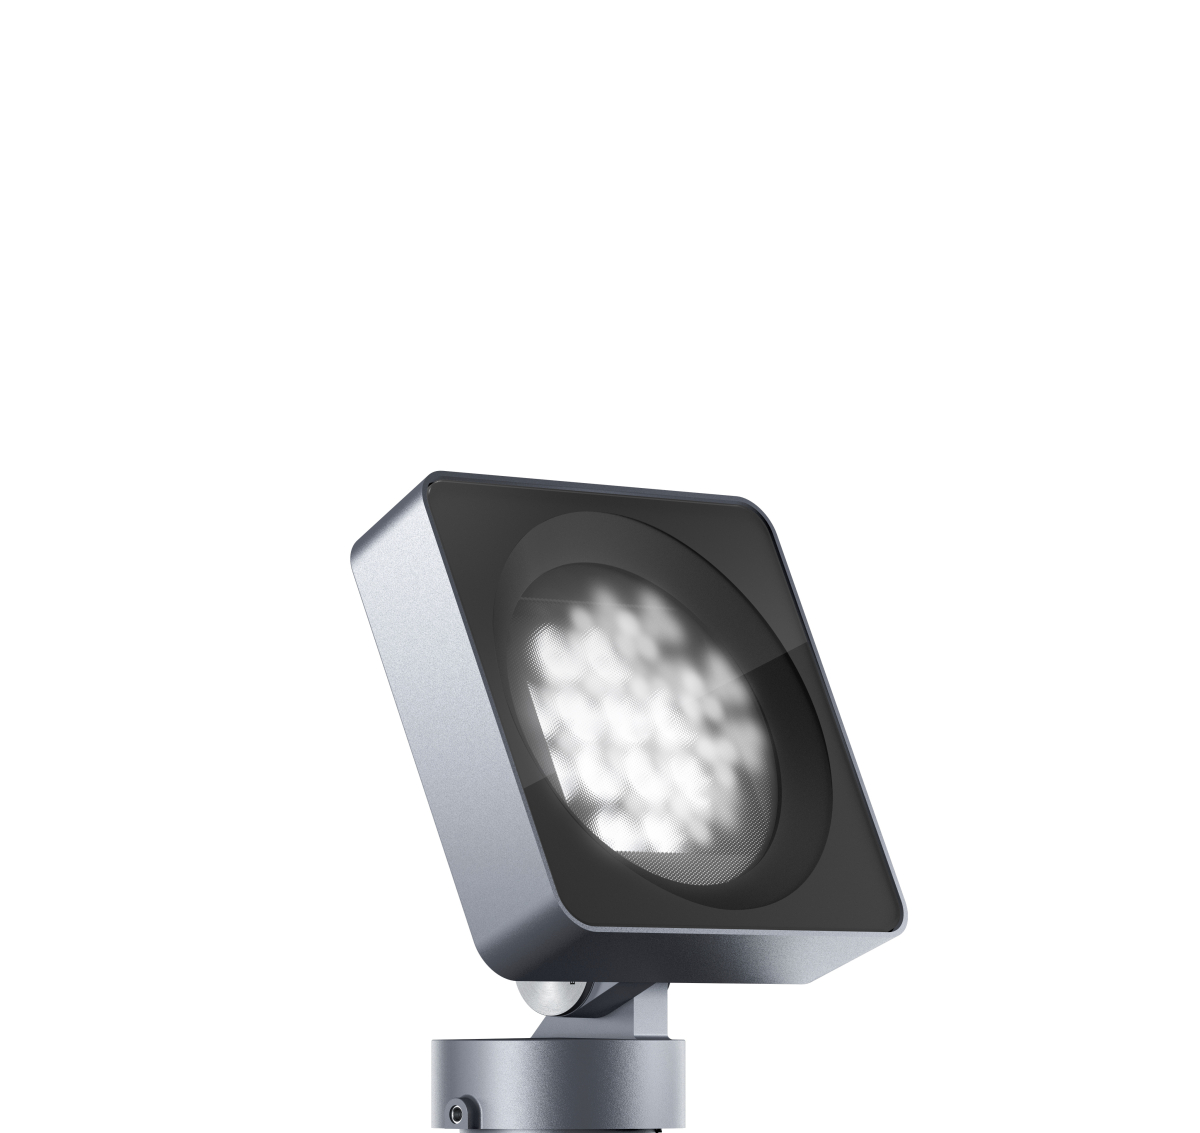 Lightscan IP65 Surf Mtd Floodlight With Mounting Plate Oval Flood Beam 48W LED 3000K ECG Graphit M